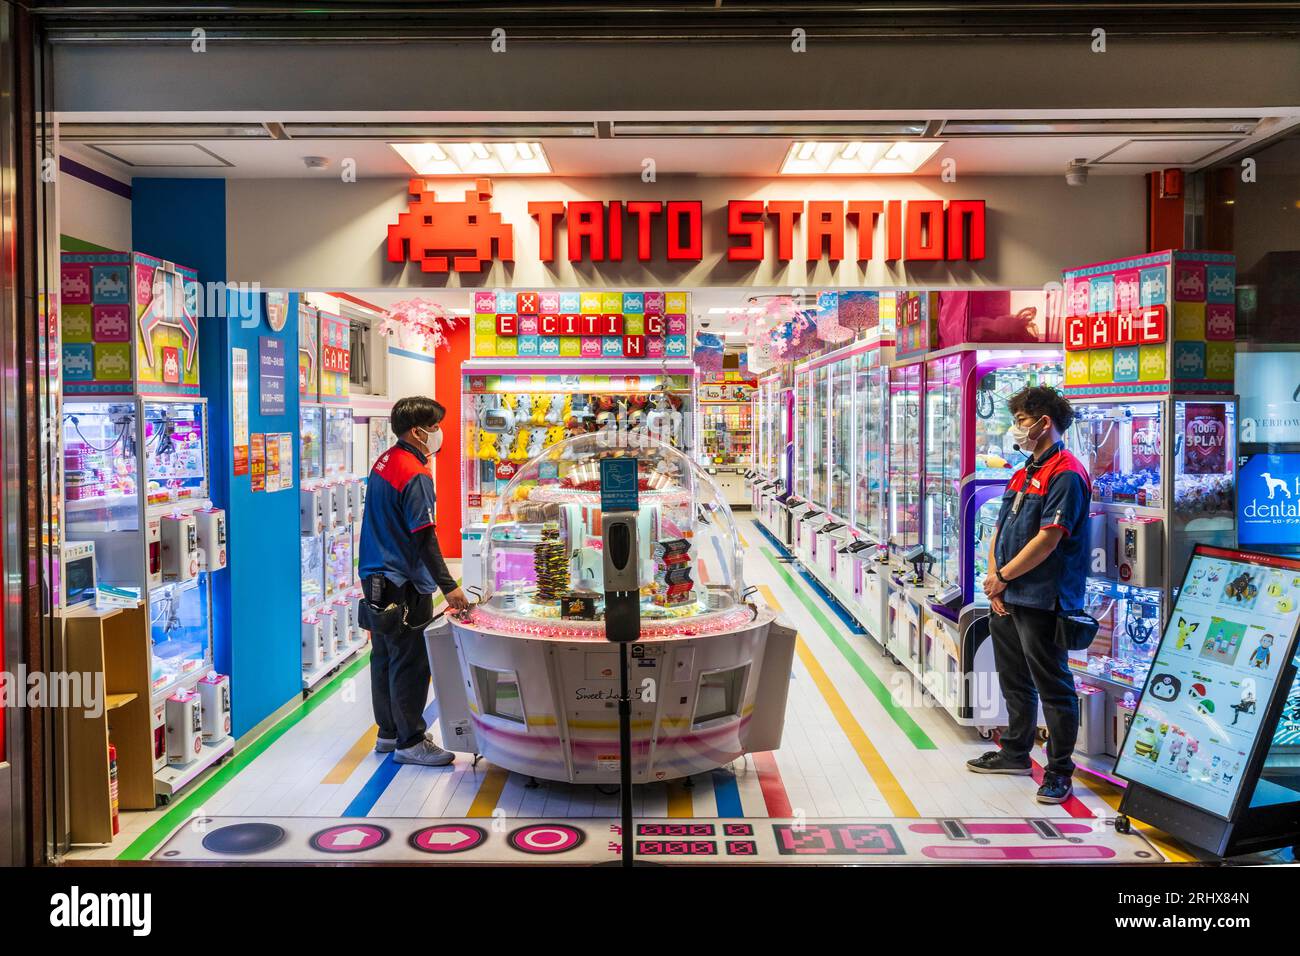 Taito Game Station, Brands of the World™